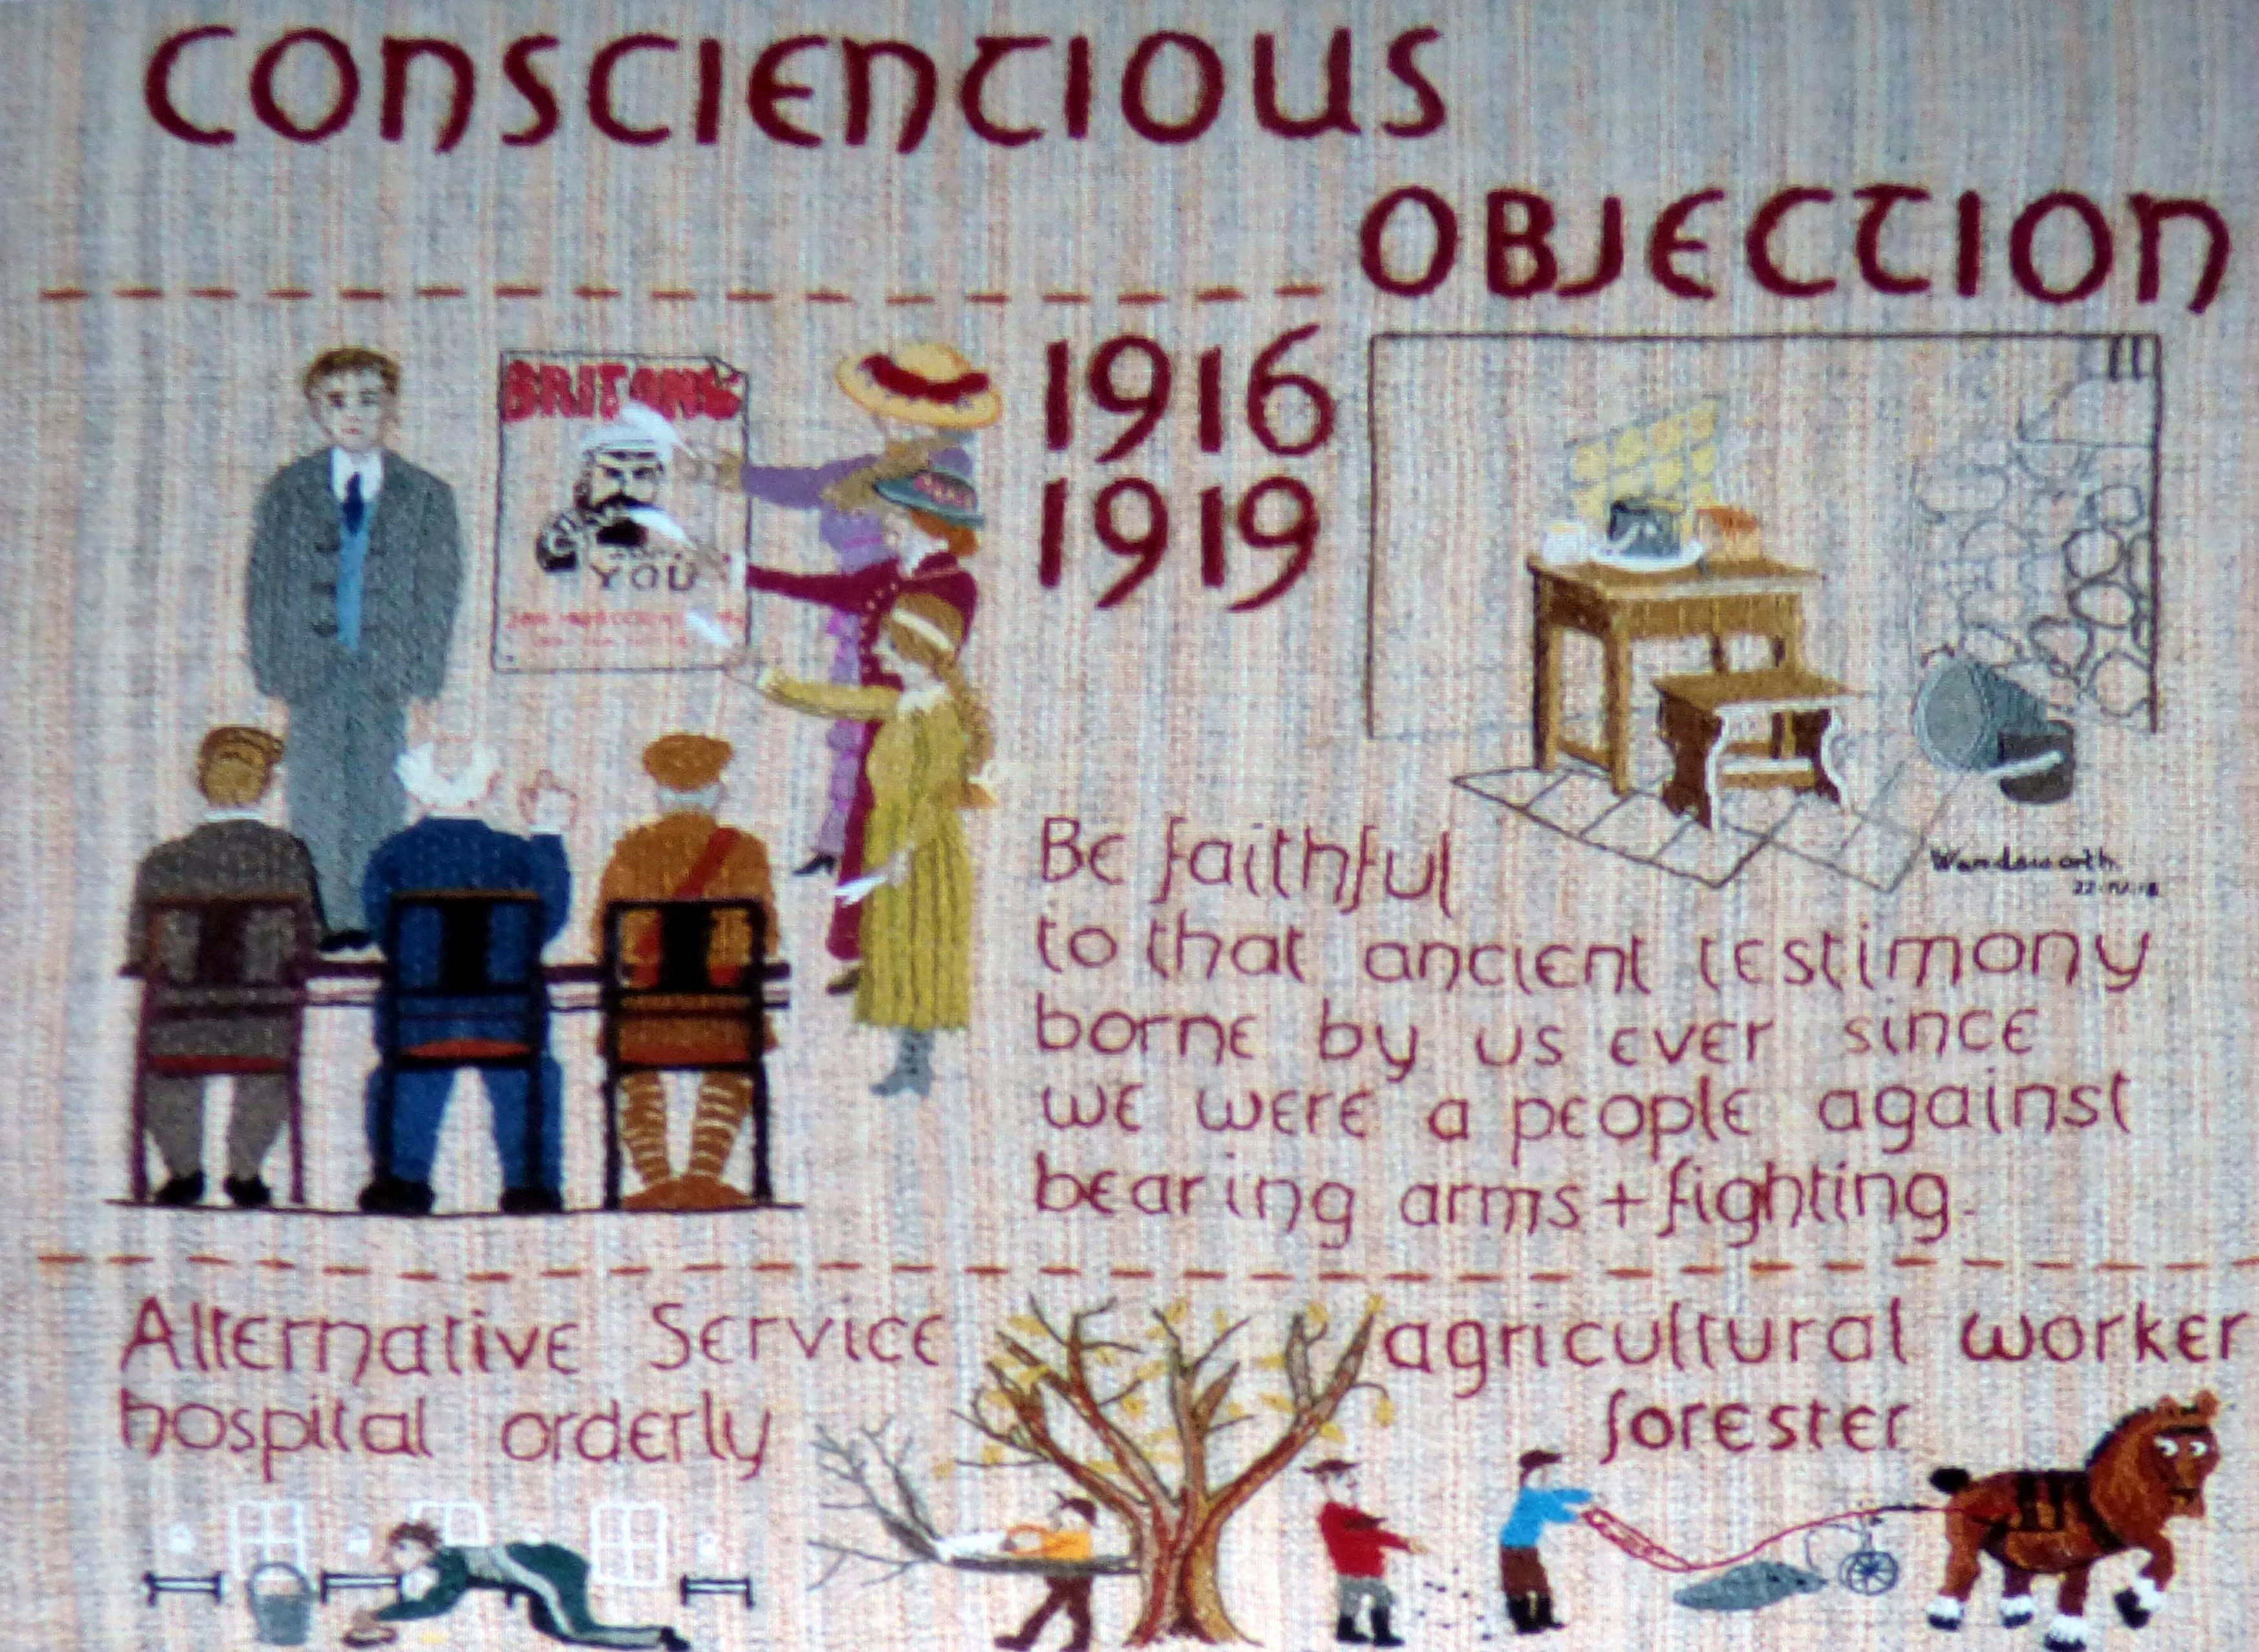 slide showing a panel from the Quaker Tapestry